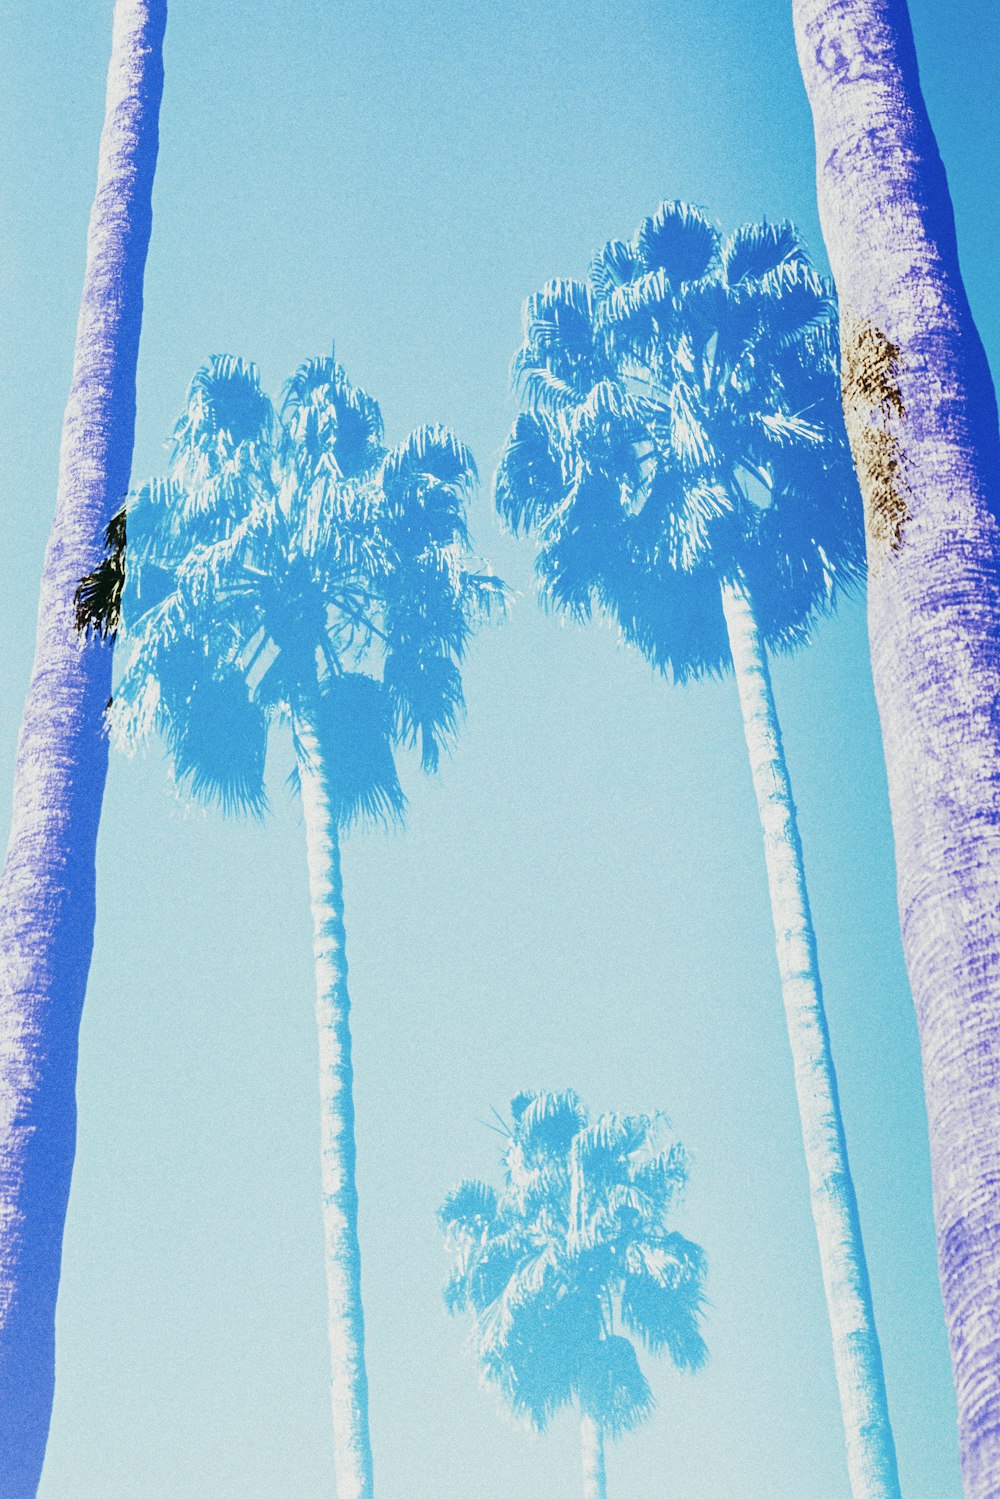 low angle photography of green palm trees under blue sky during daytime